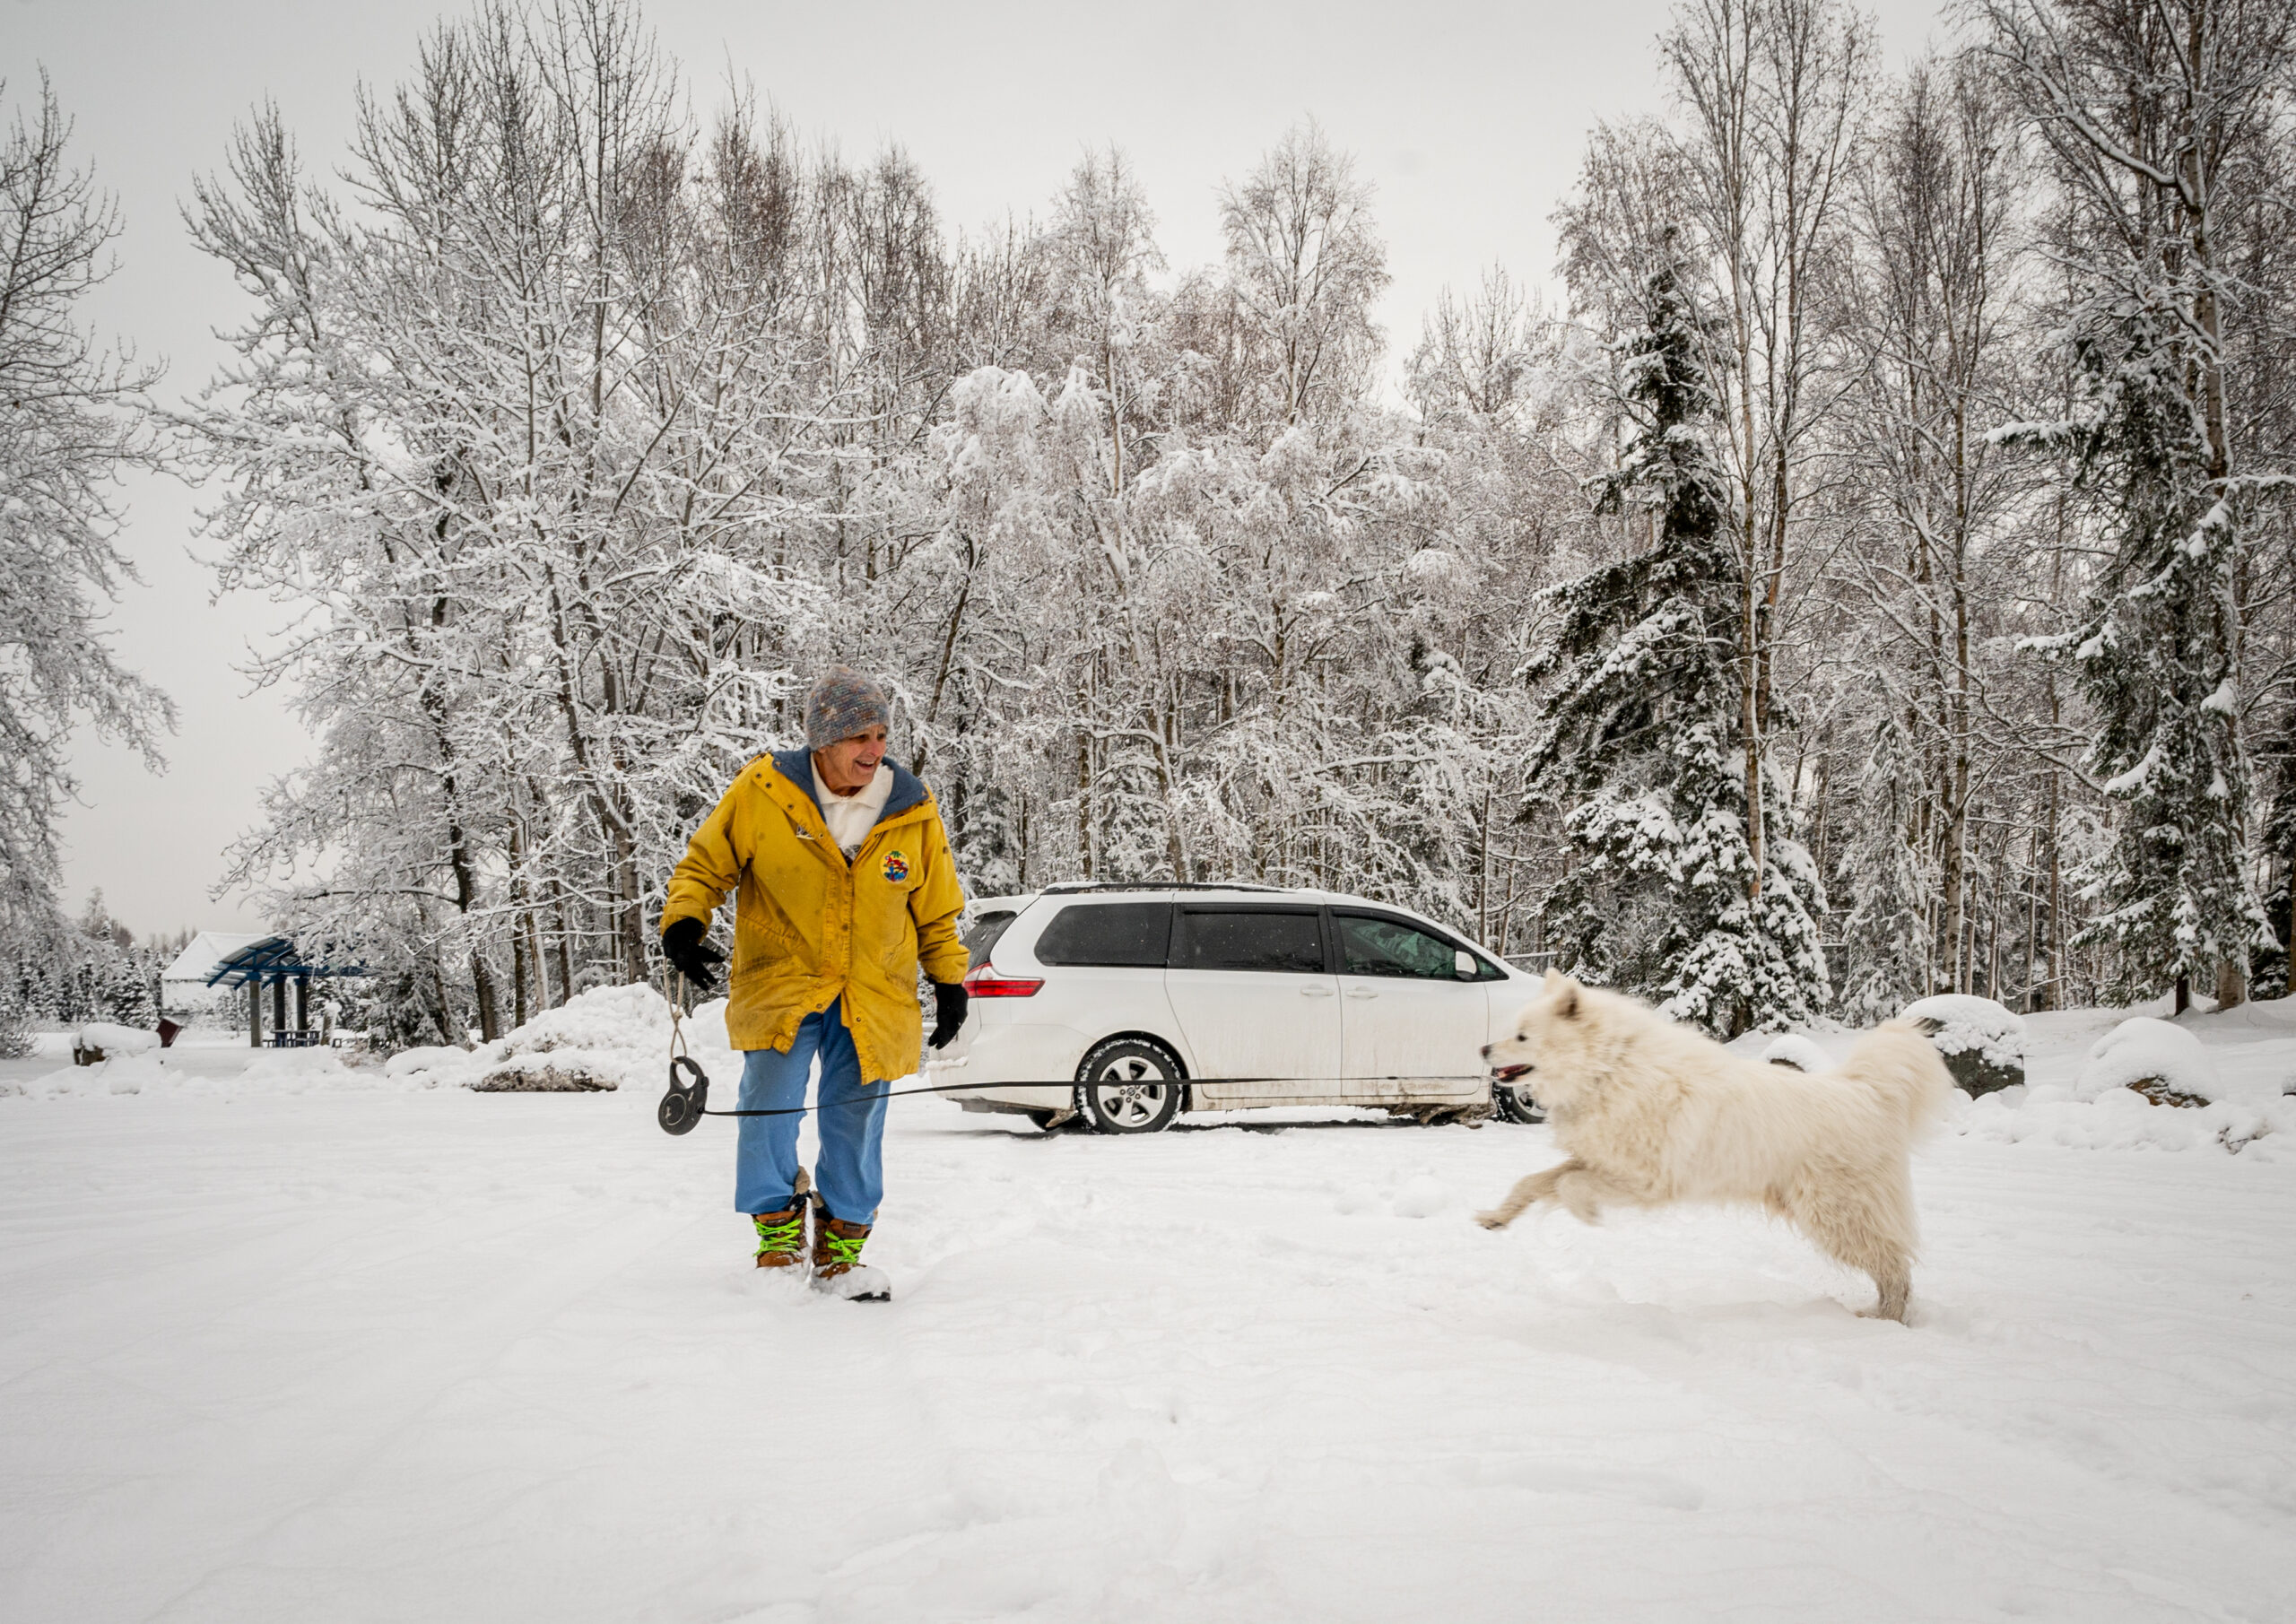 A woman in a yellow jacket walks her dog in the snow.